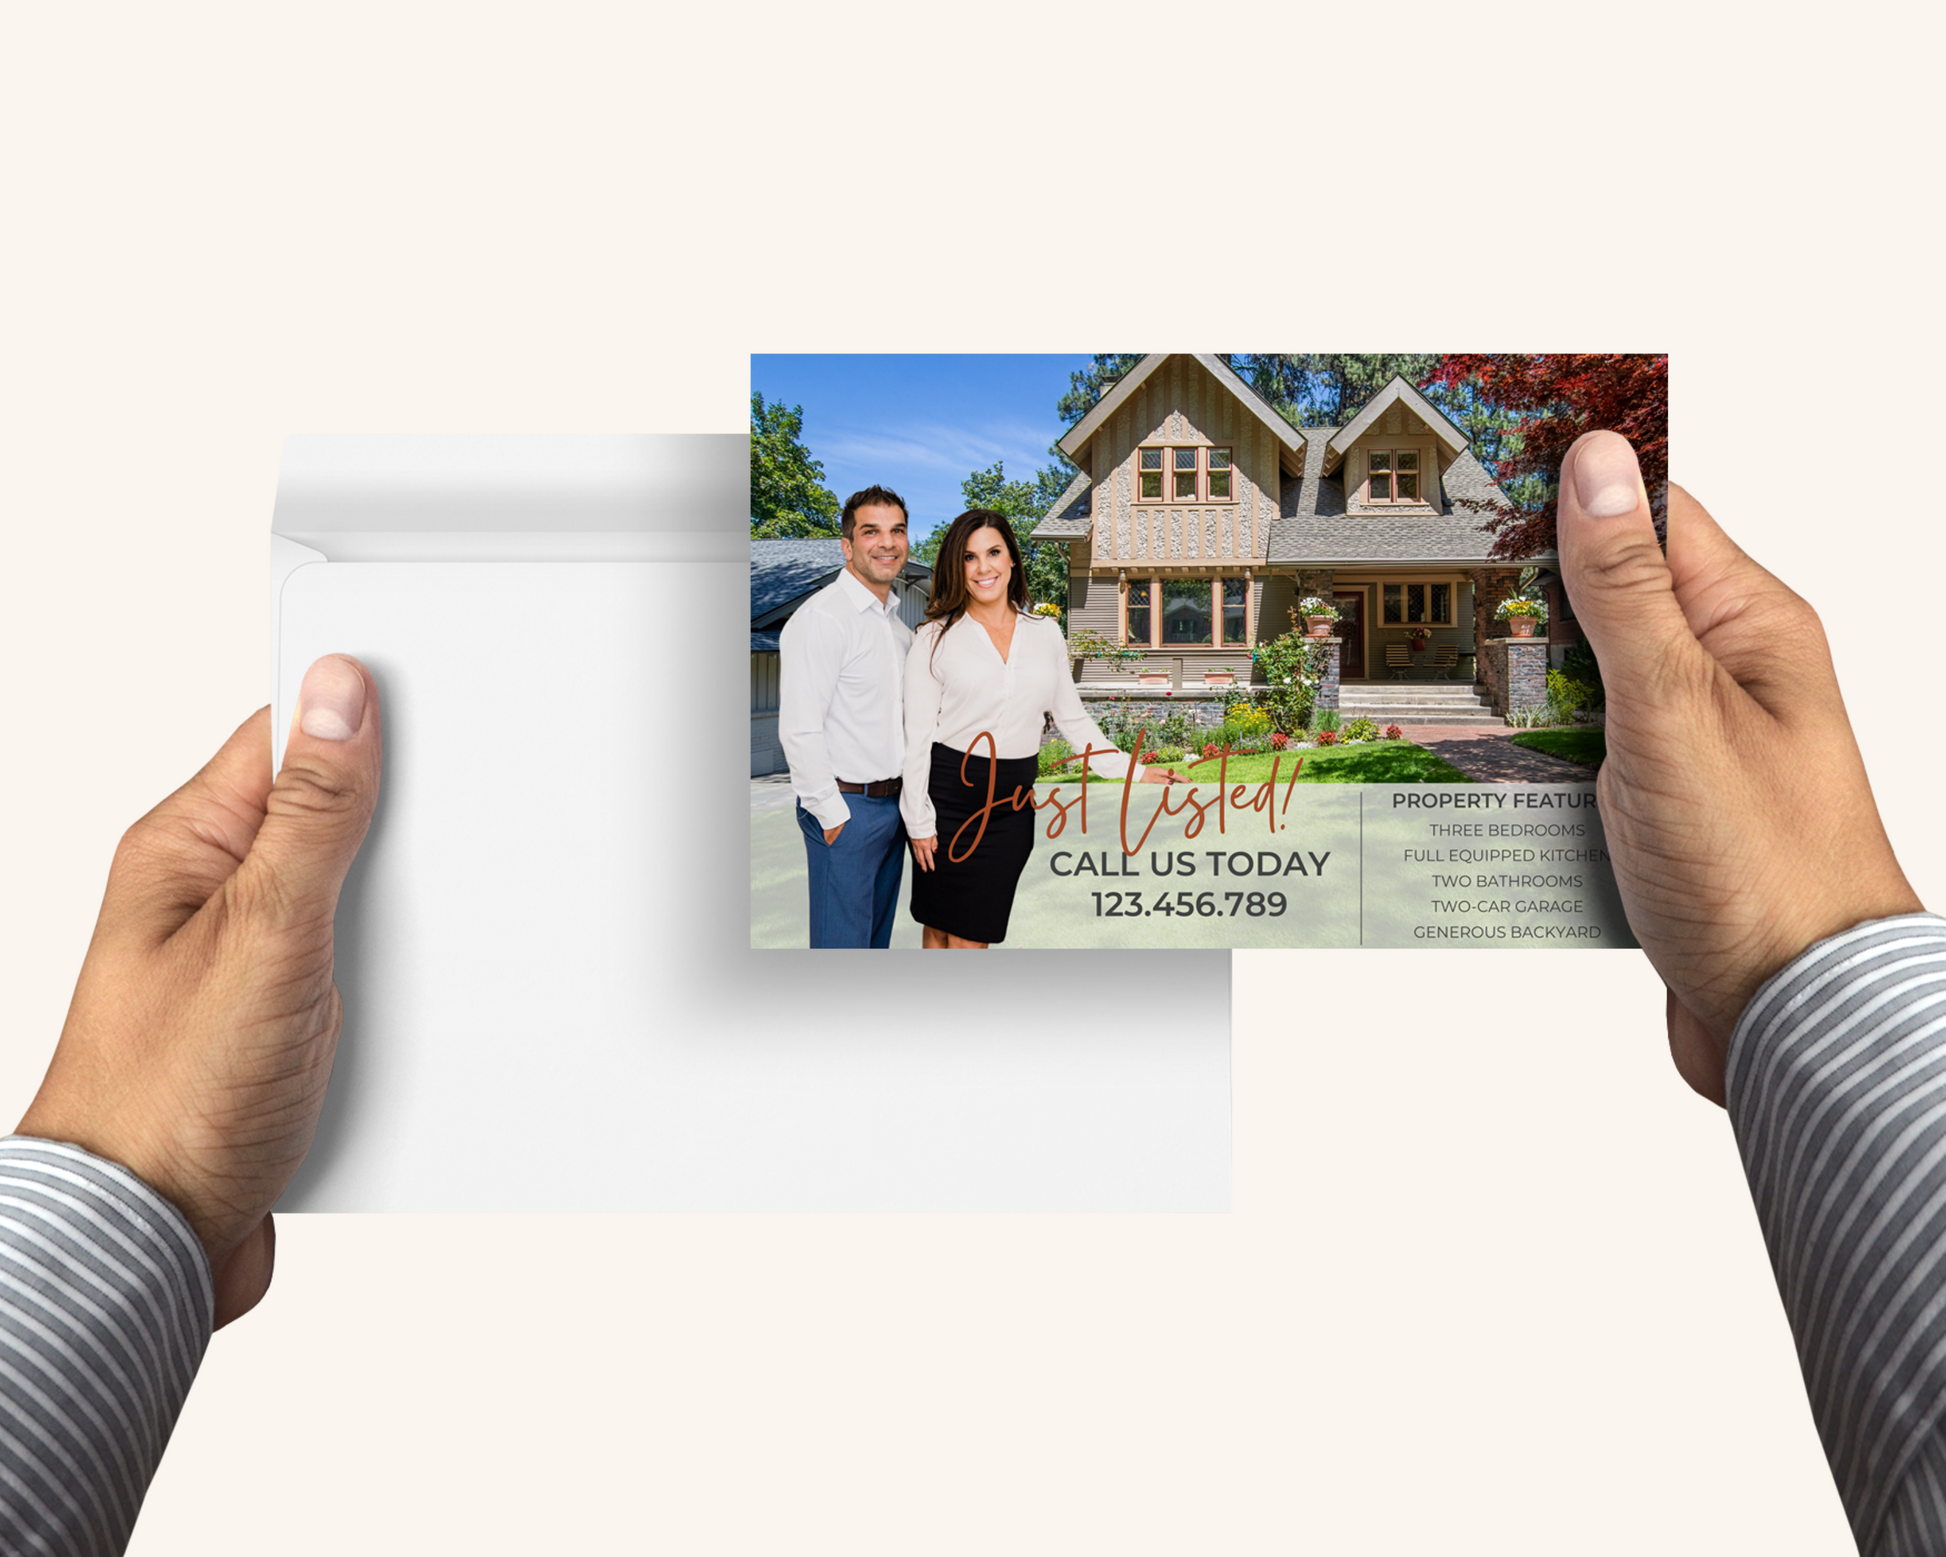 Real Estate Template – Real Estate Postcard 6 - Just Listed